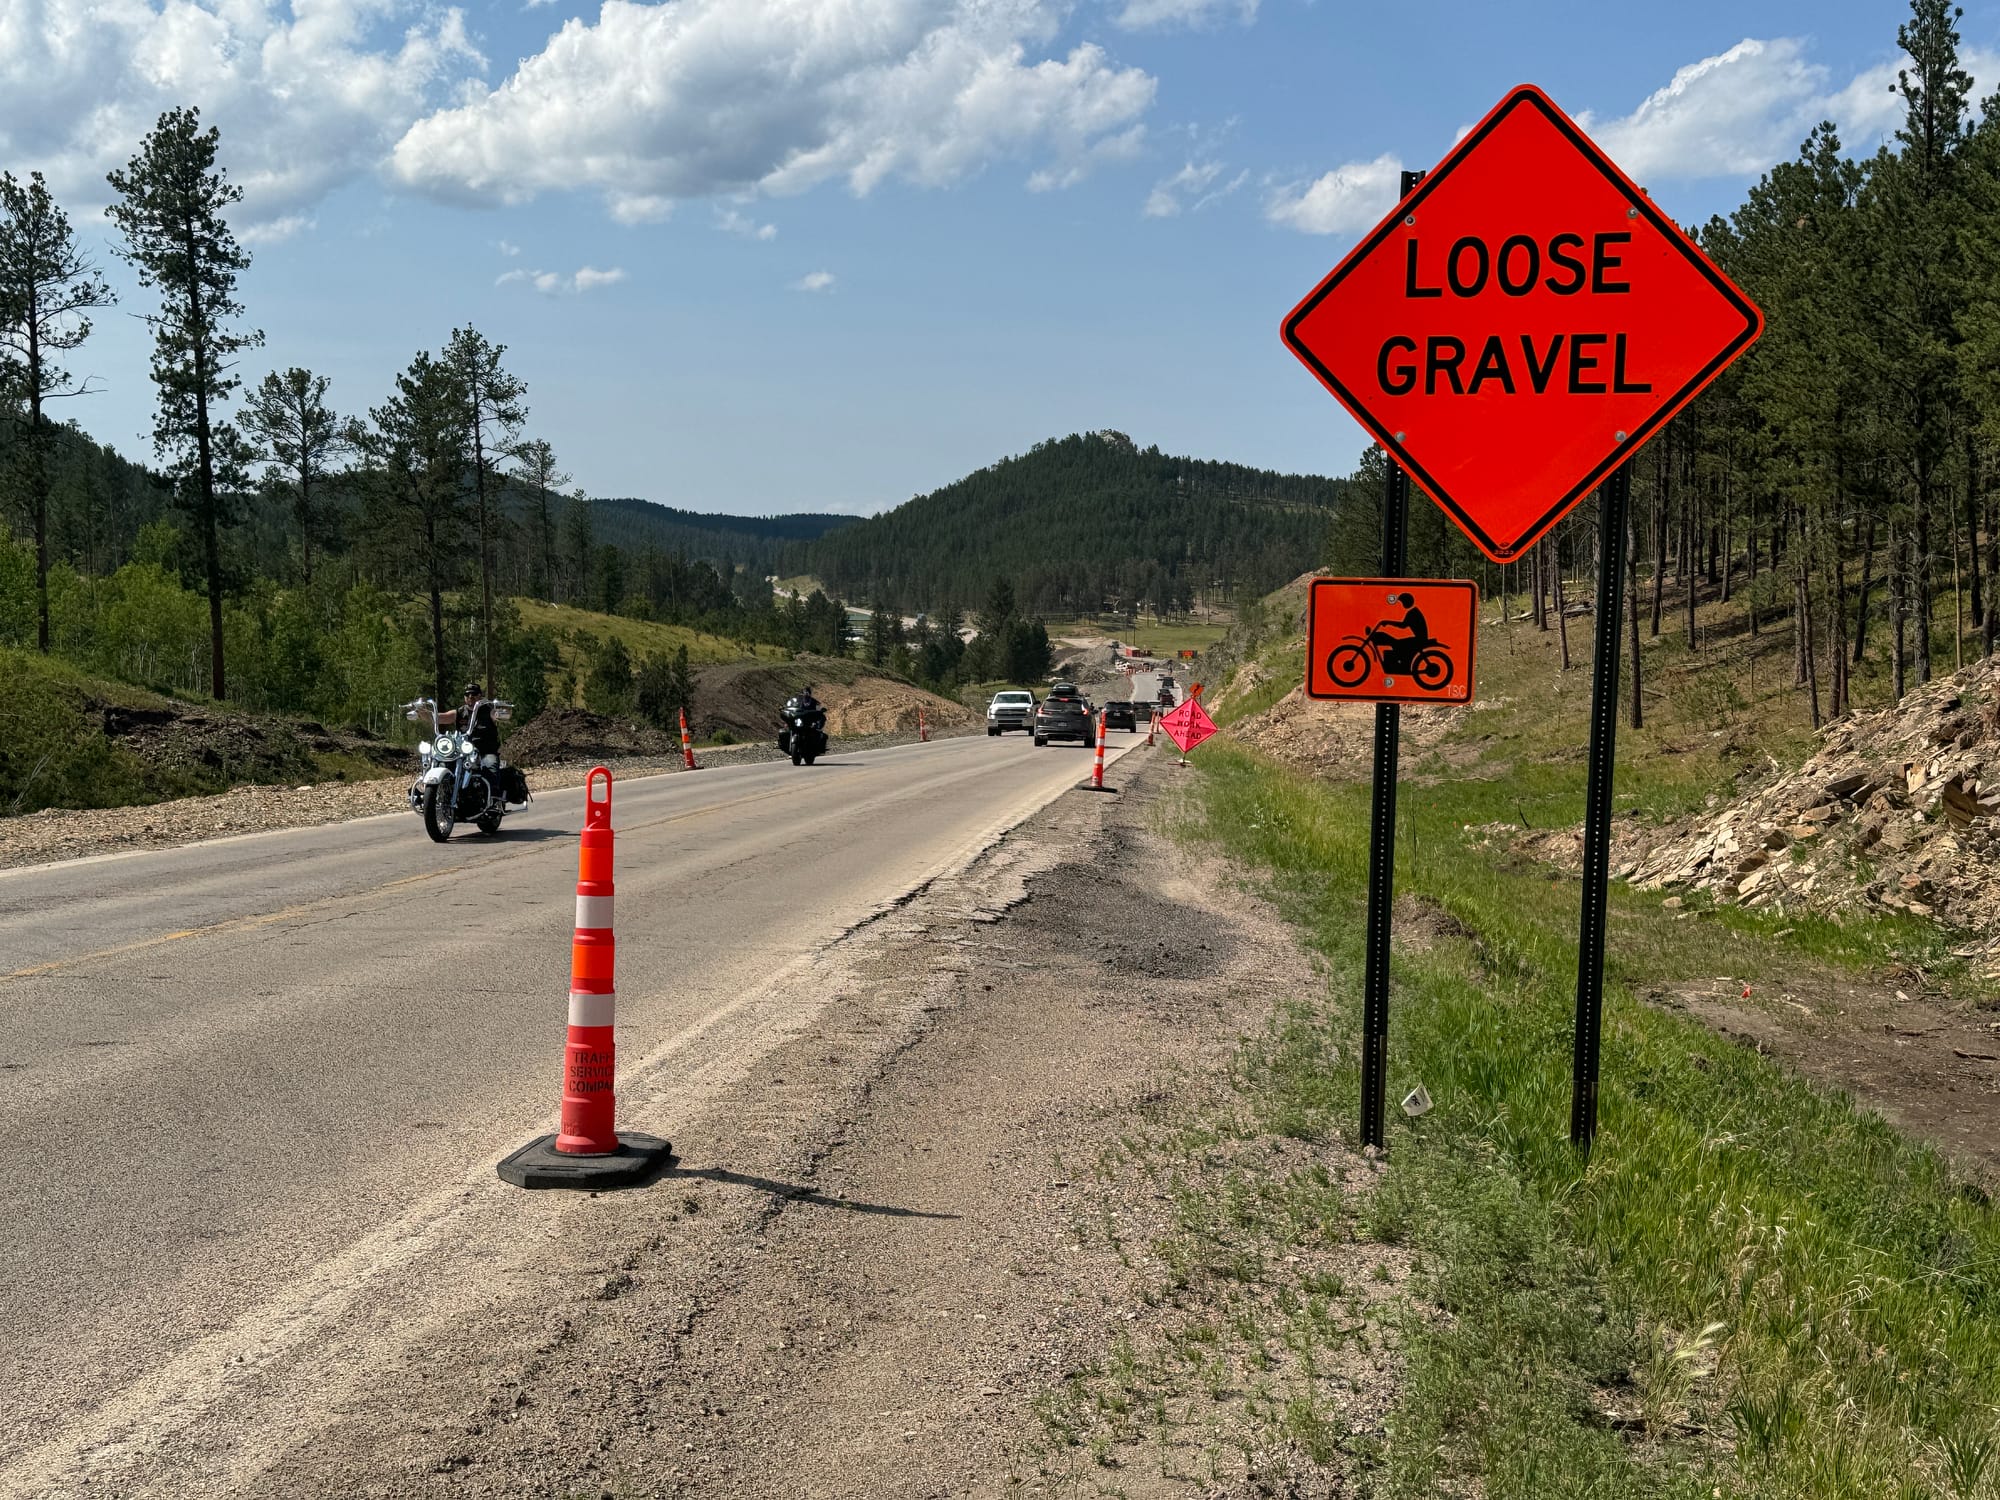 Cars and motorcycles travel down Highway 385 during construction in the Black Hills